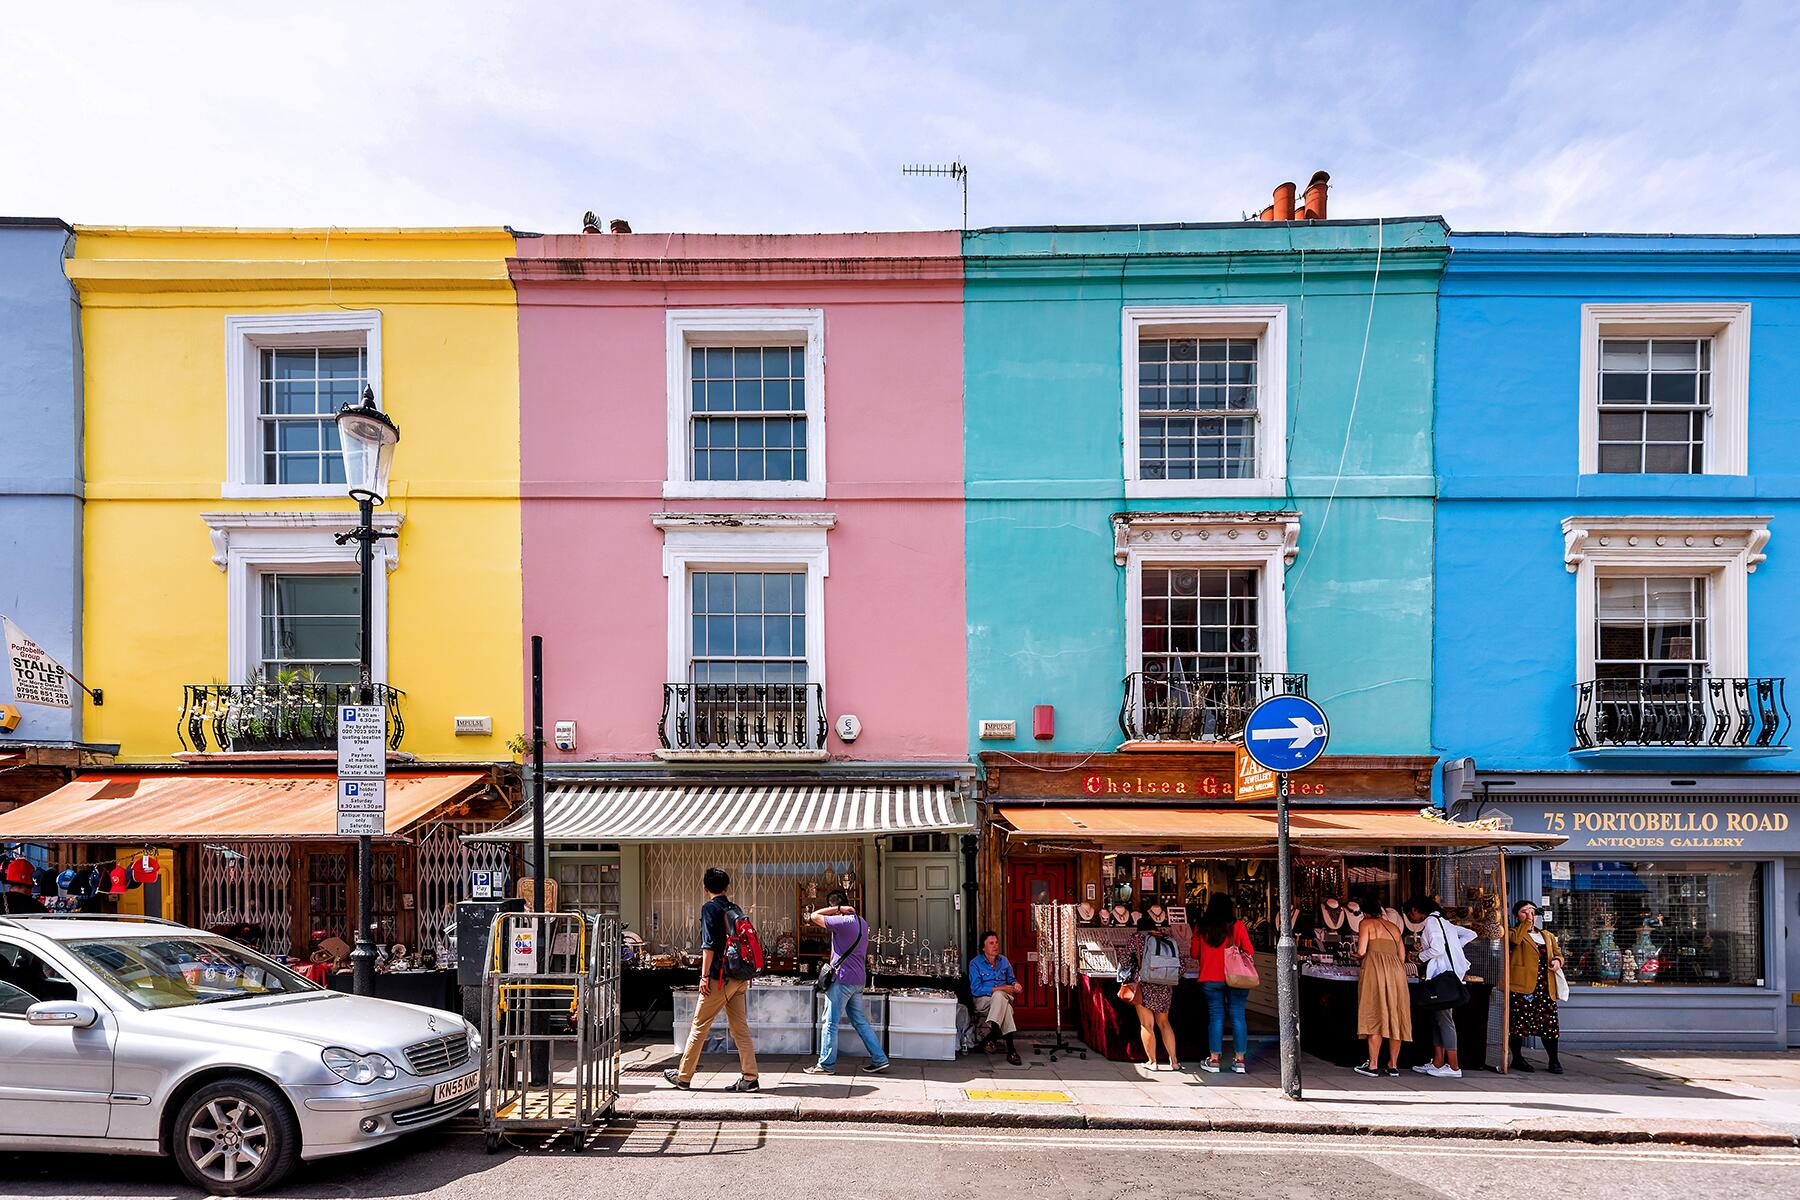 Places From the Movie Notting Hill That You Can Visit